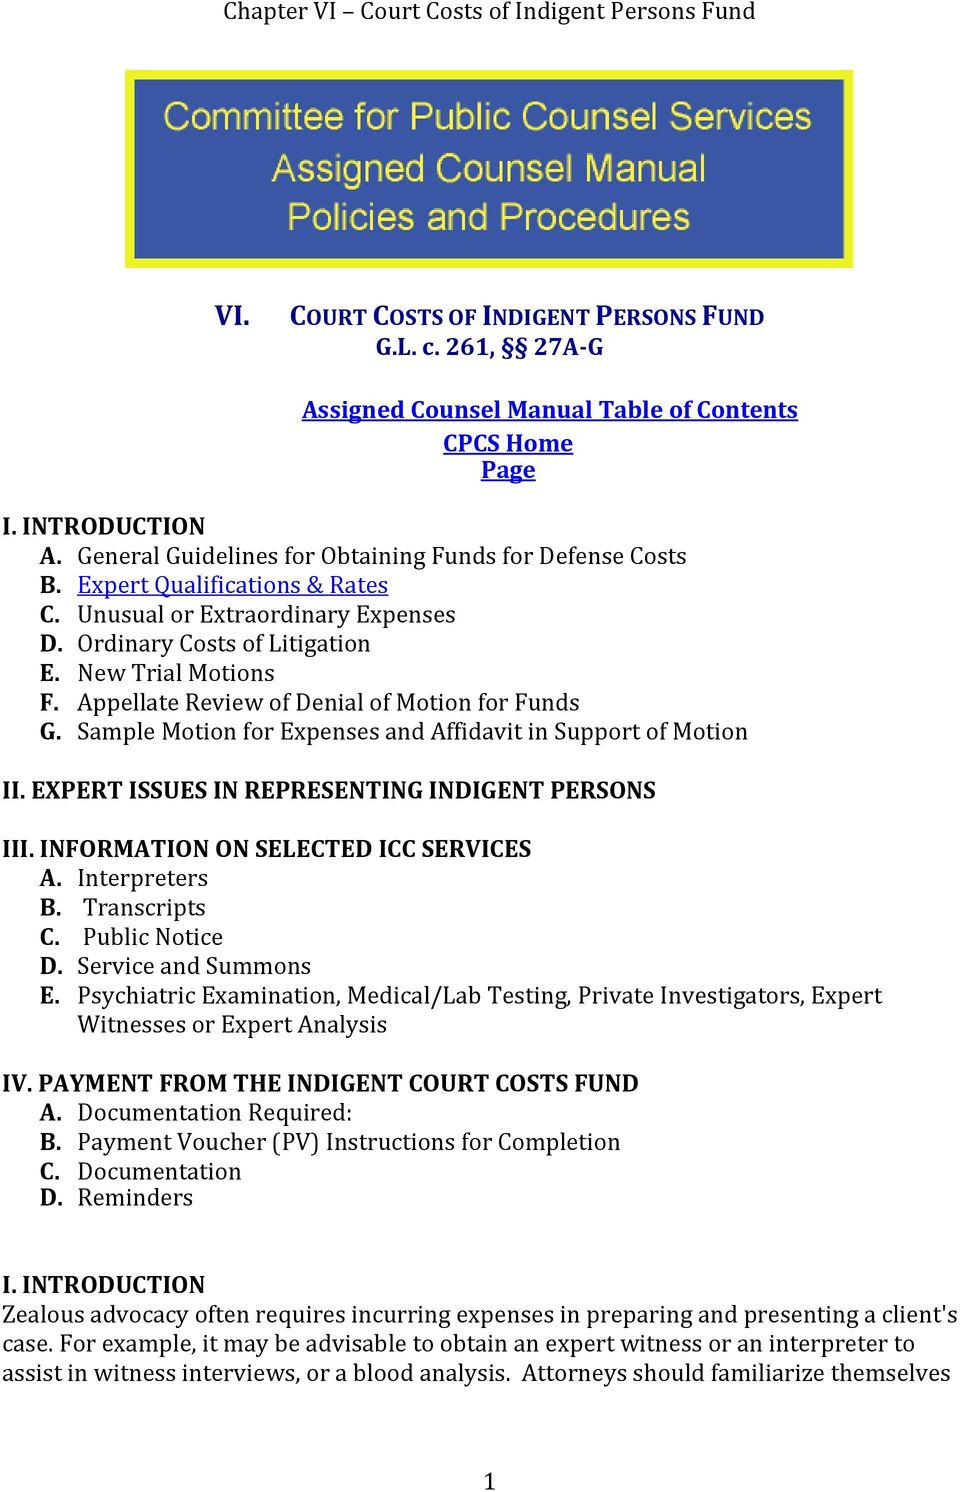 Sample Motion for Expenses and Affidavit in Support of Motion II. EXPERT ISSUES IN REPRESENTING INDIGENT PERSONS III. INFORMATION ON SELECTED ICC SERVICES A. Interpreters B. Transcripts C.